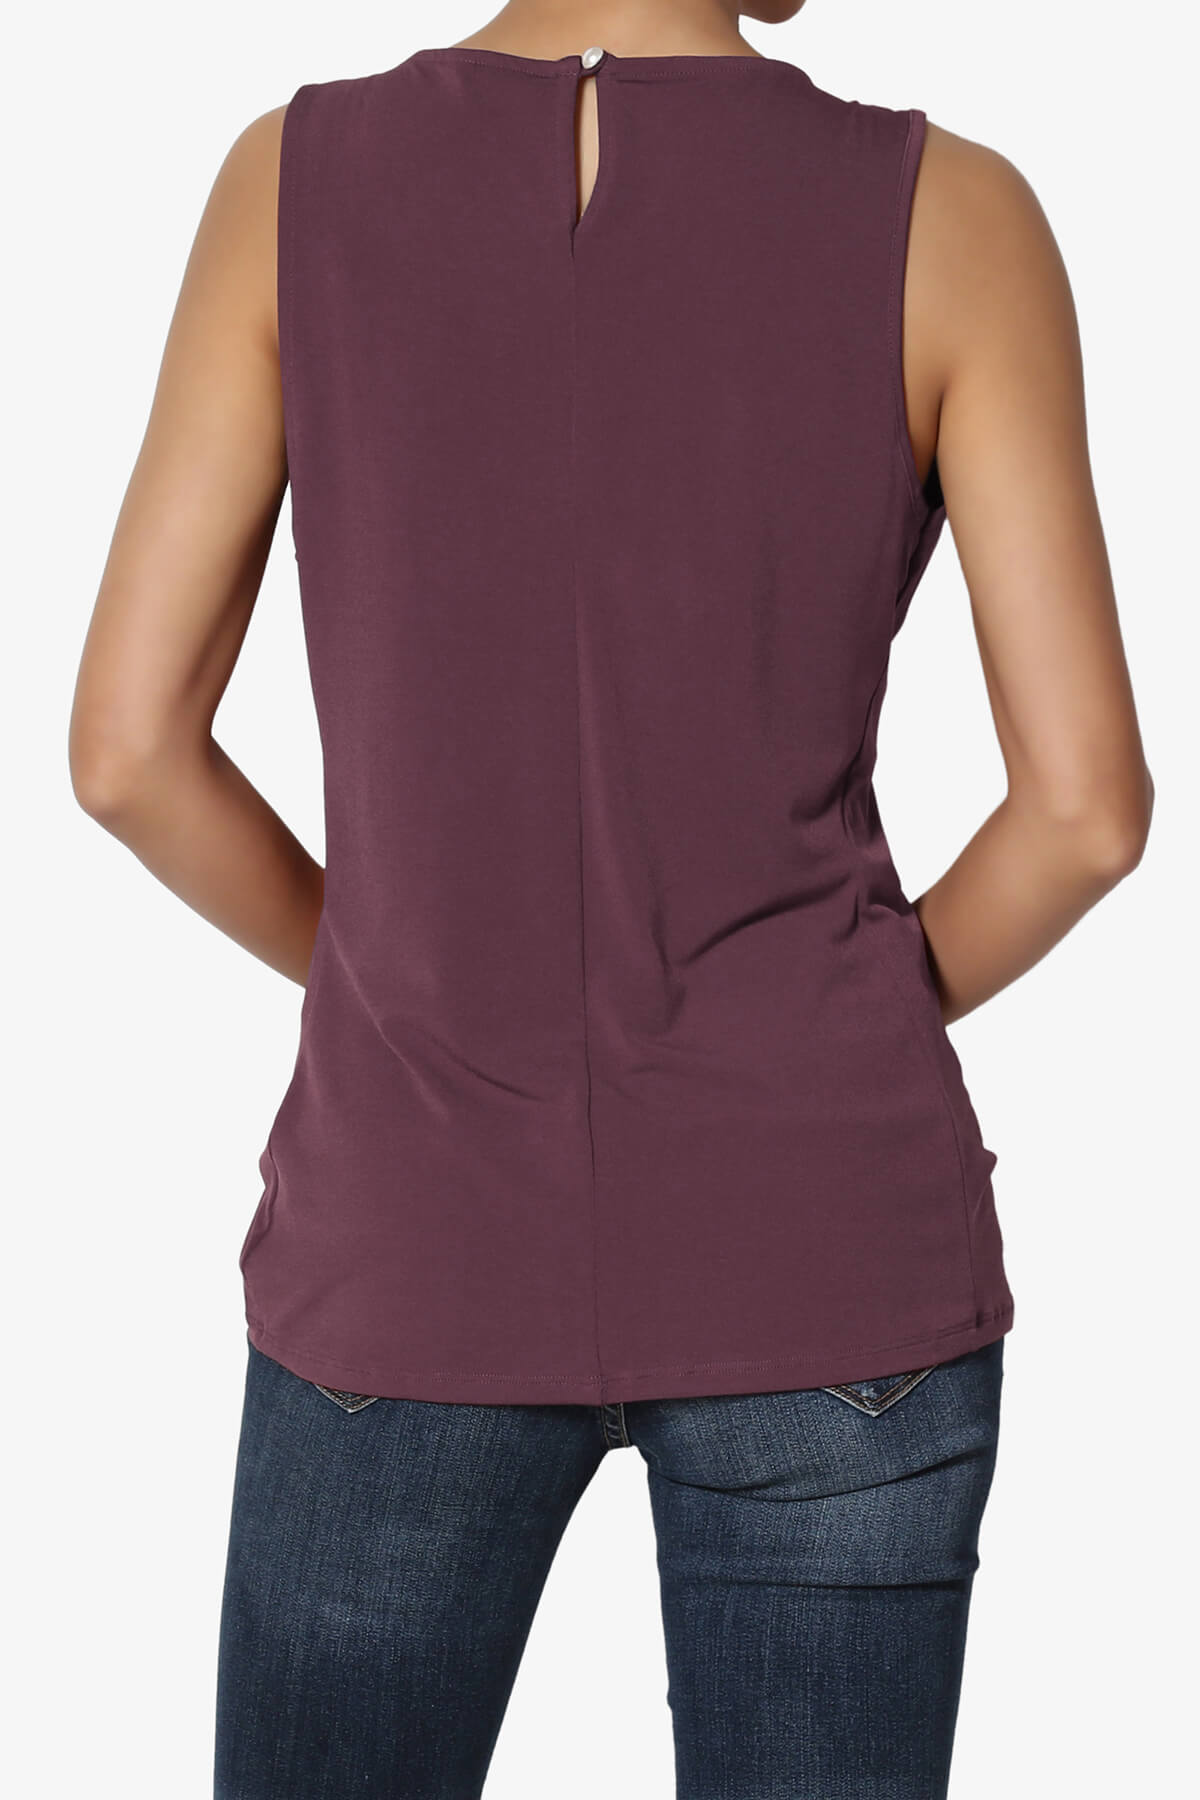 Load image into Gallery viewer, Chaffee Pleat Neck Tank Top DUSTY PLUM_2
